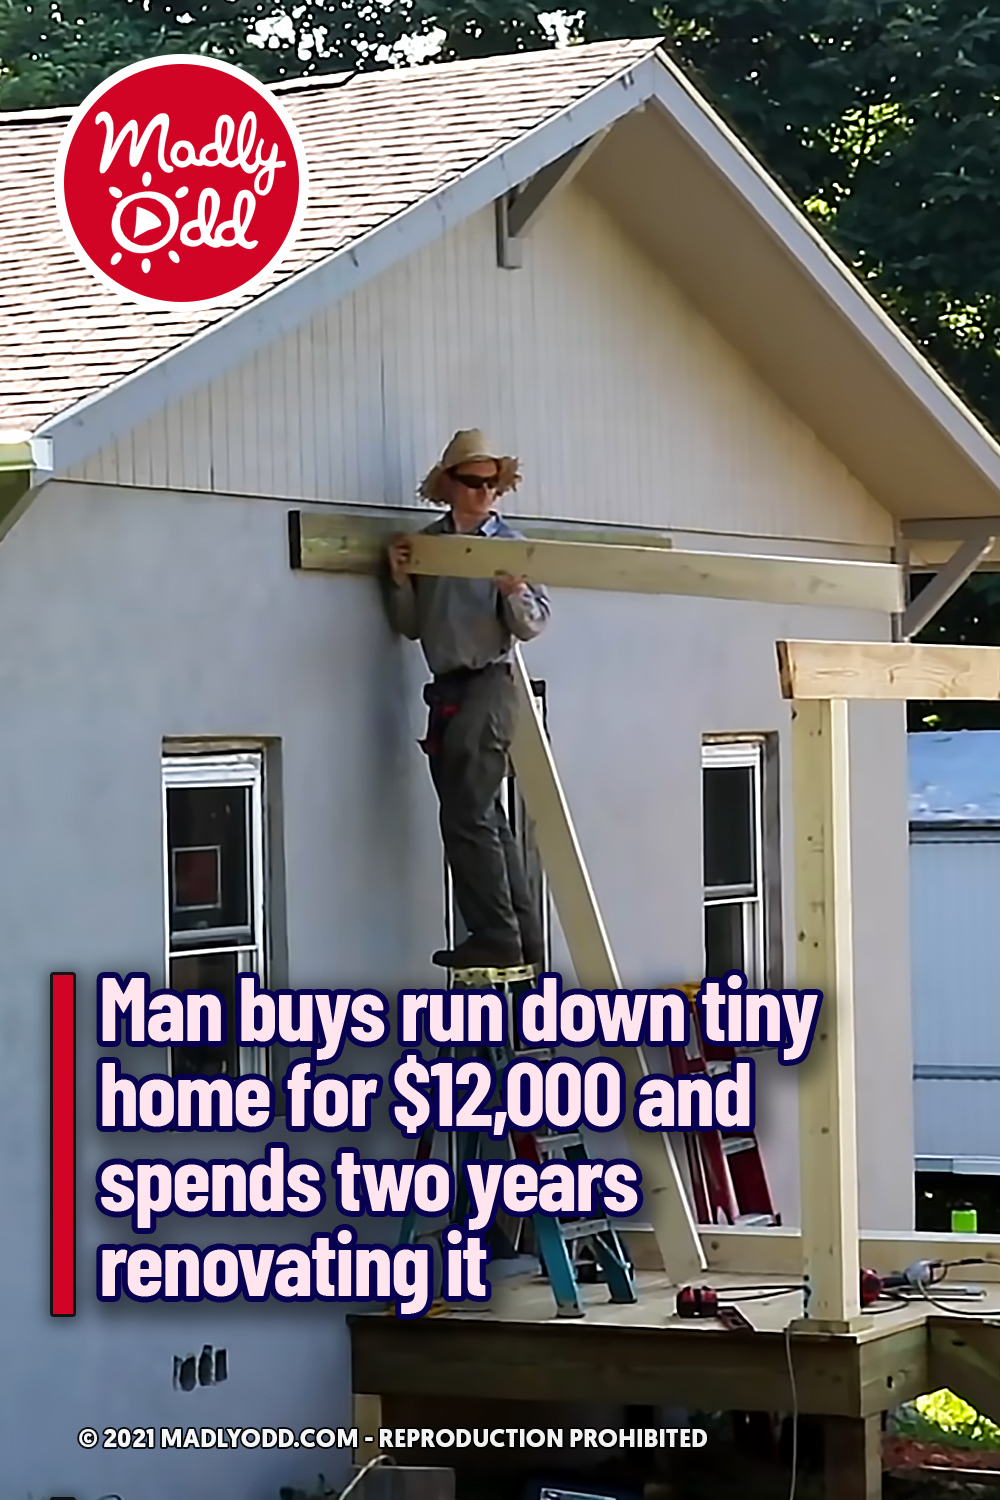 Man buys run down tiny home for $12,000 and spends two years renovating it